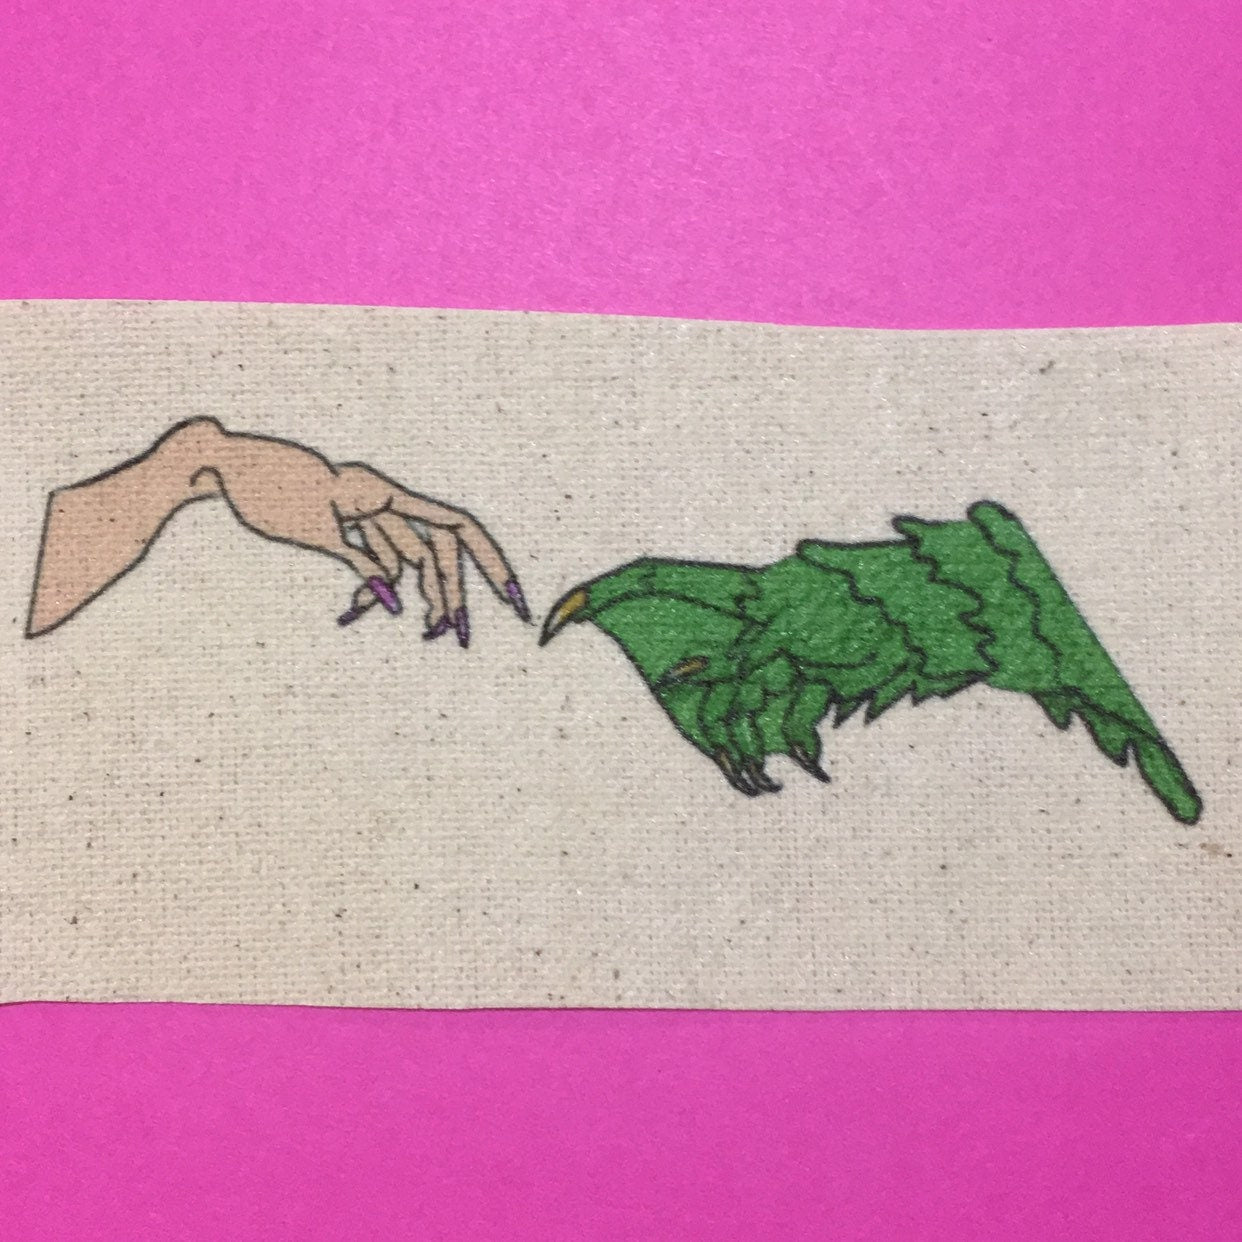 Creation of Creature Patch